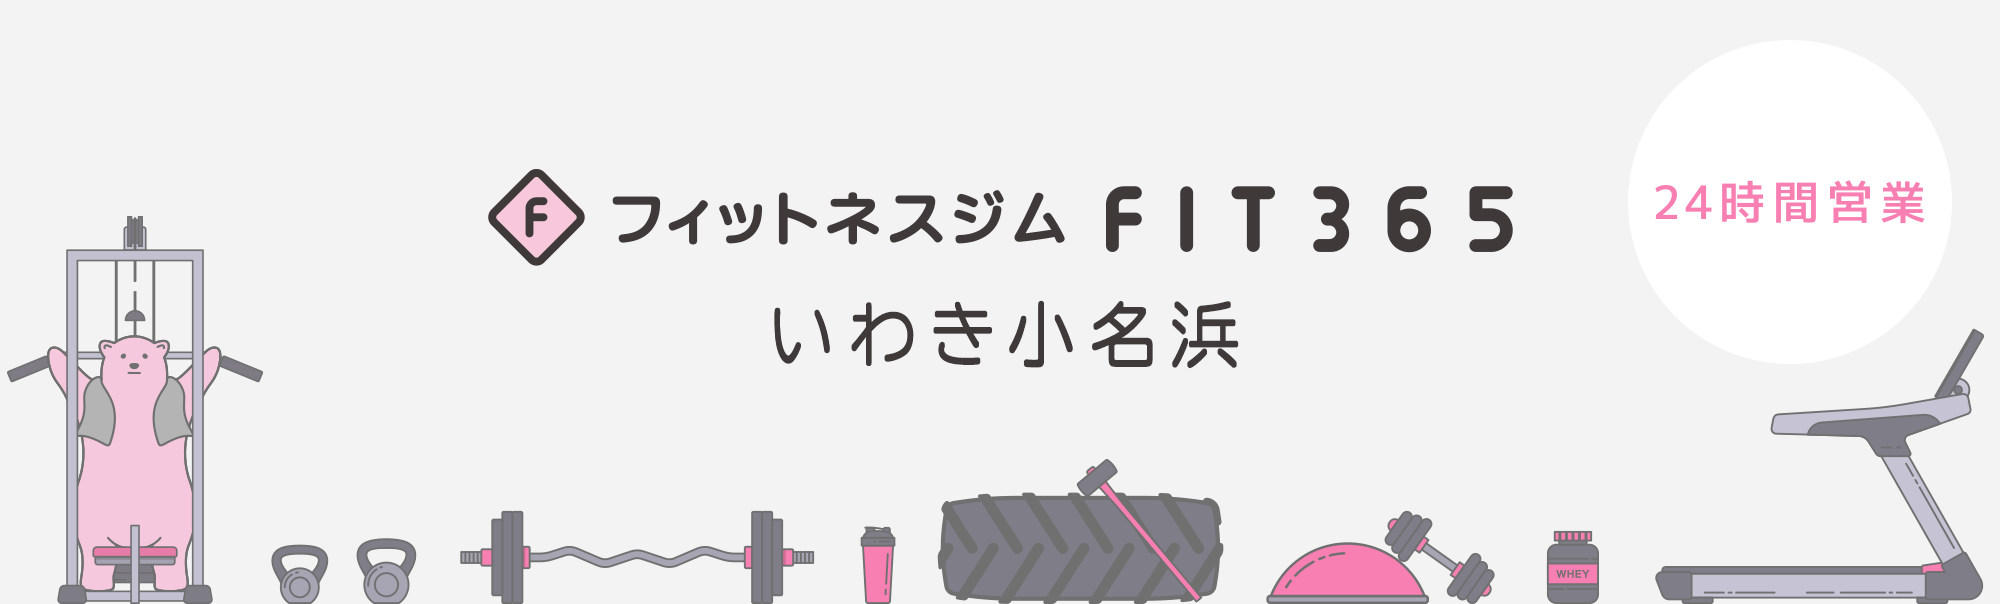 FIT365 いわき小名浜